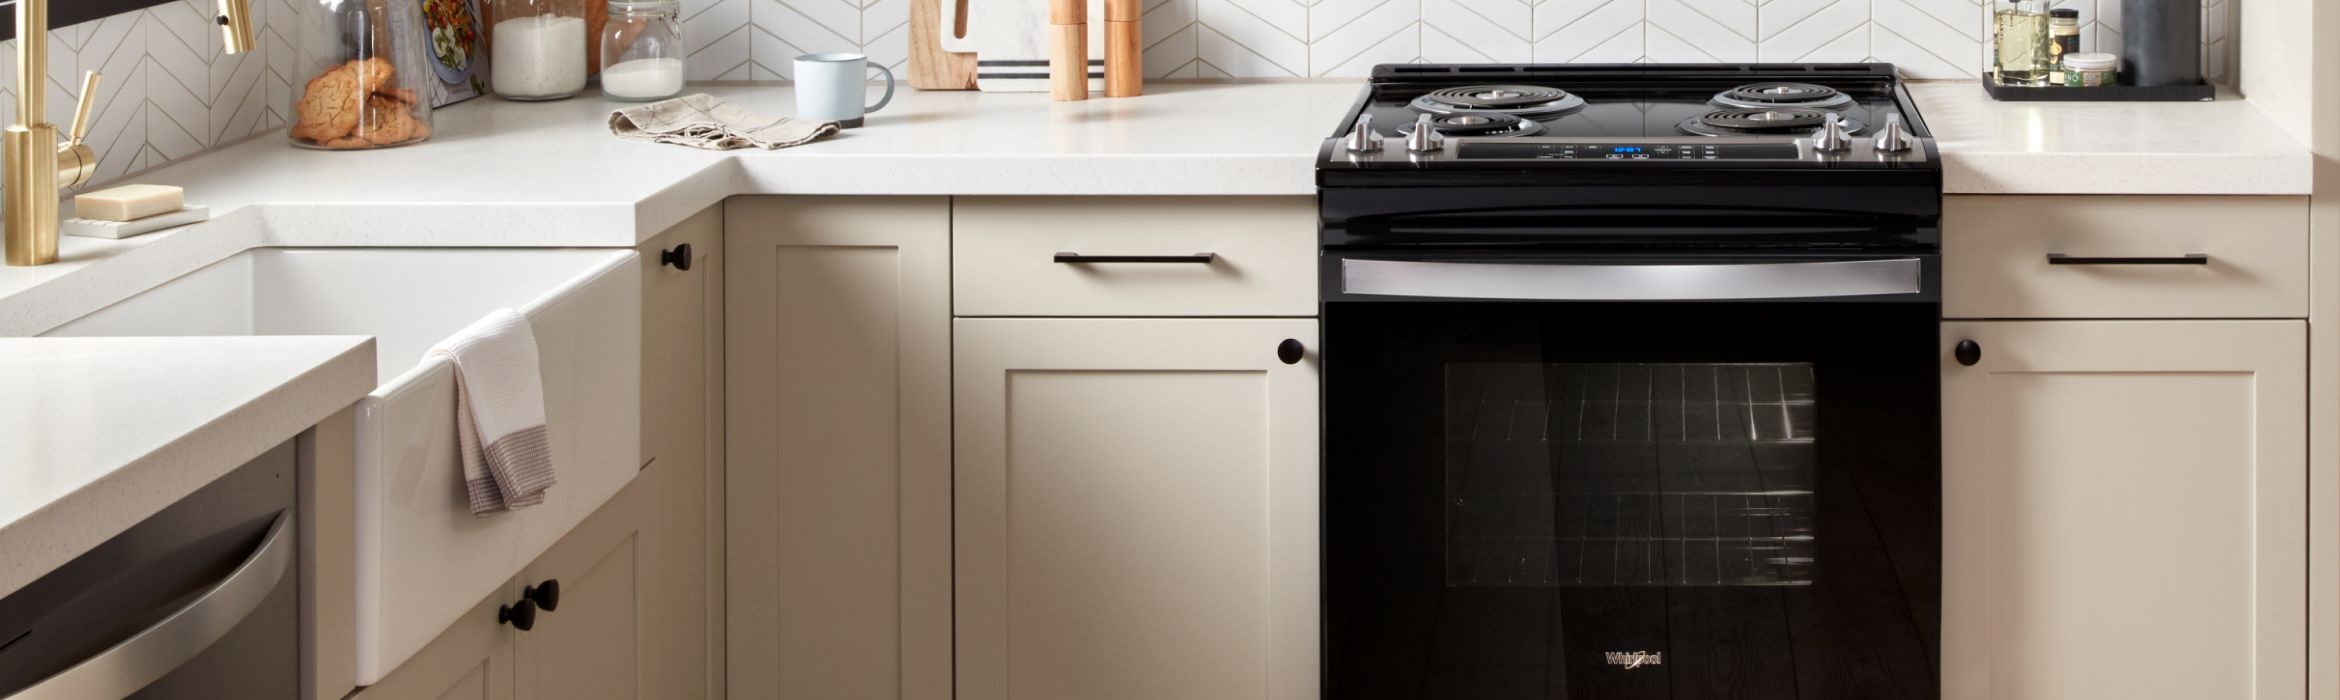 A bright, clean kitchen with a Whirlpool® Starter Electric Range